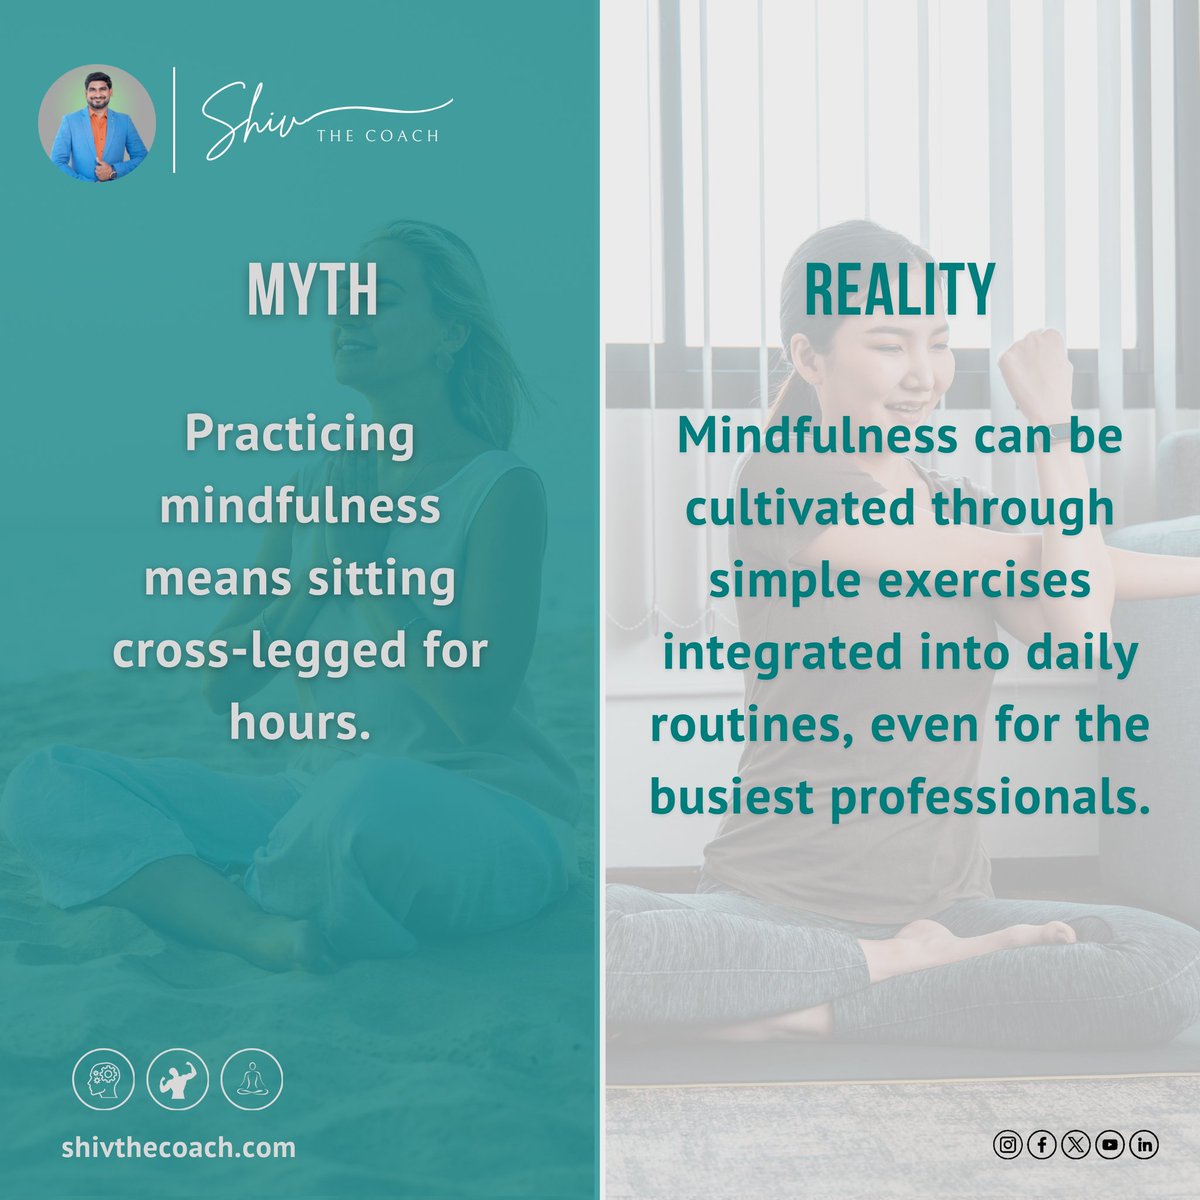 'Mindfulness is not at all sitting cross-legged for hours together, instead it can be cultivated through simple exercises.'
#Mindfulness
#DailyMindfulness
#MindfulLiving
#MindfulnessPractice
#MindfulMoments
#MindfulLife
#MindfulnessMatters
#MindfulnessMeditation
#MindfulDaily